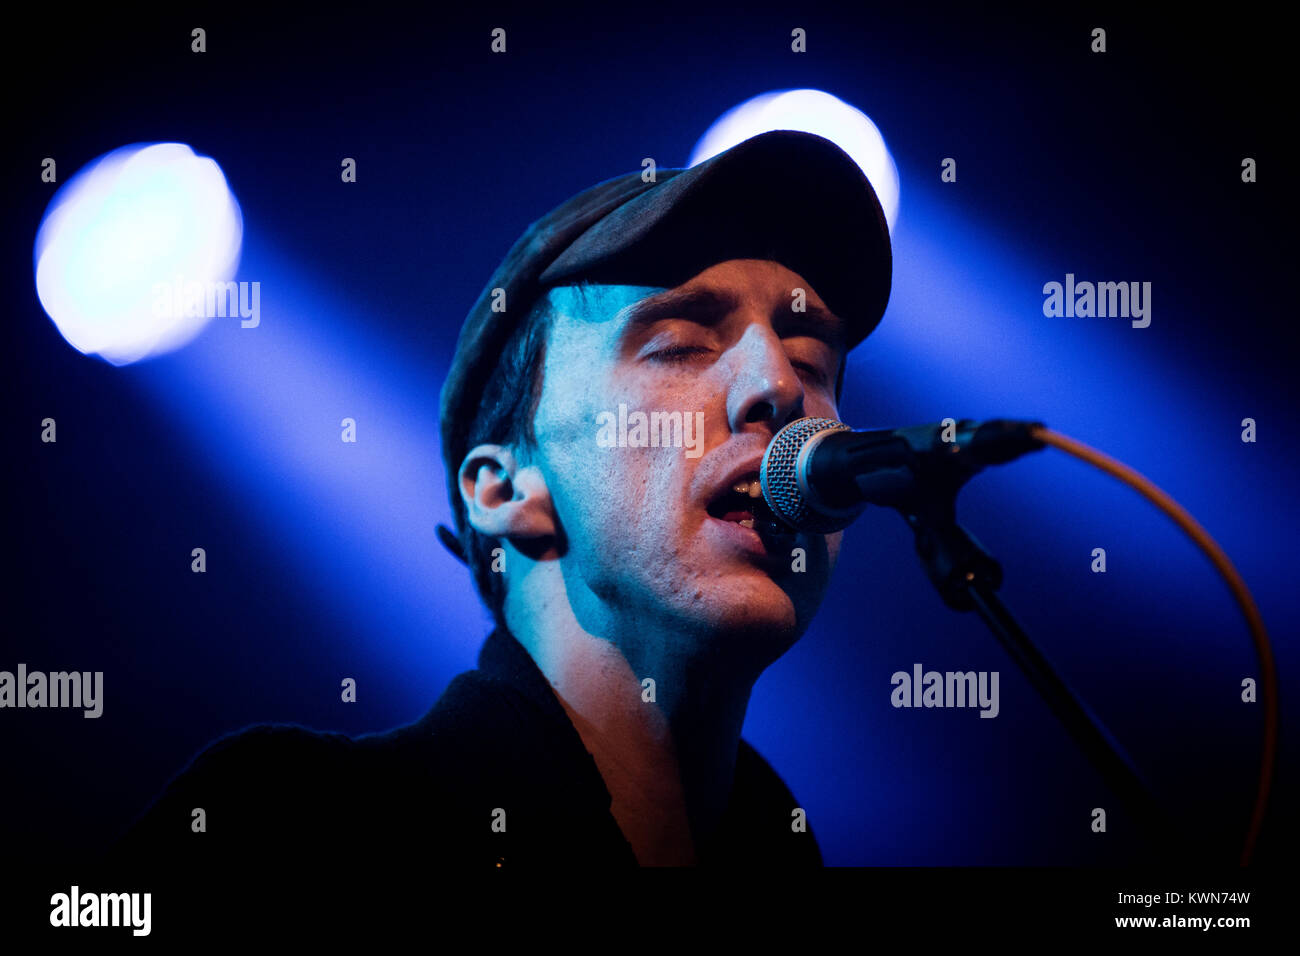 Deerhunter, the American indie rock band, performs a live concert at VEGA in Copenhagen. Here singer and songwriter Bradford Cox is seen live on stage. Denmark, 19/11 2015. Stock Photo